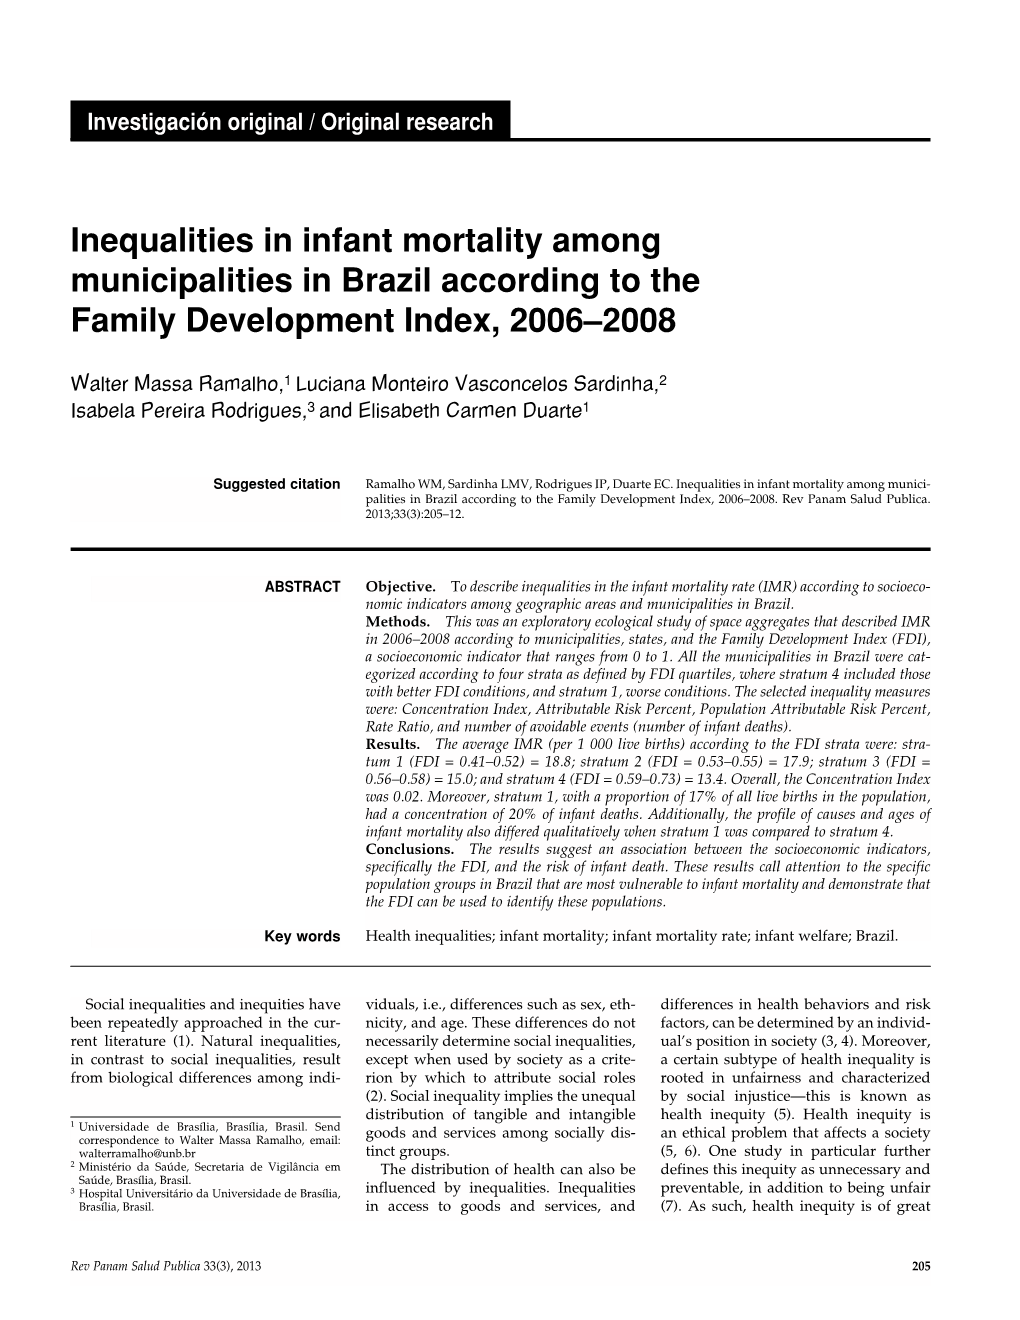 Inequalities in Infant Mortality Among Municipalities in Brazil According to the Family Development Index, 2006–2008